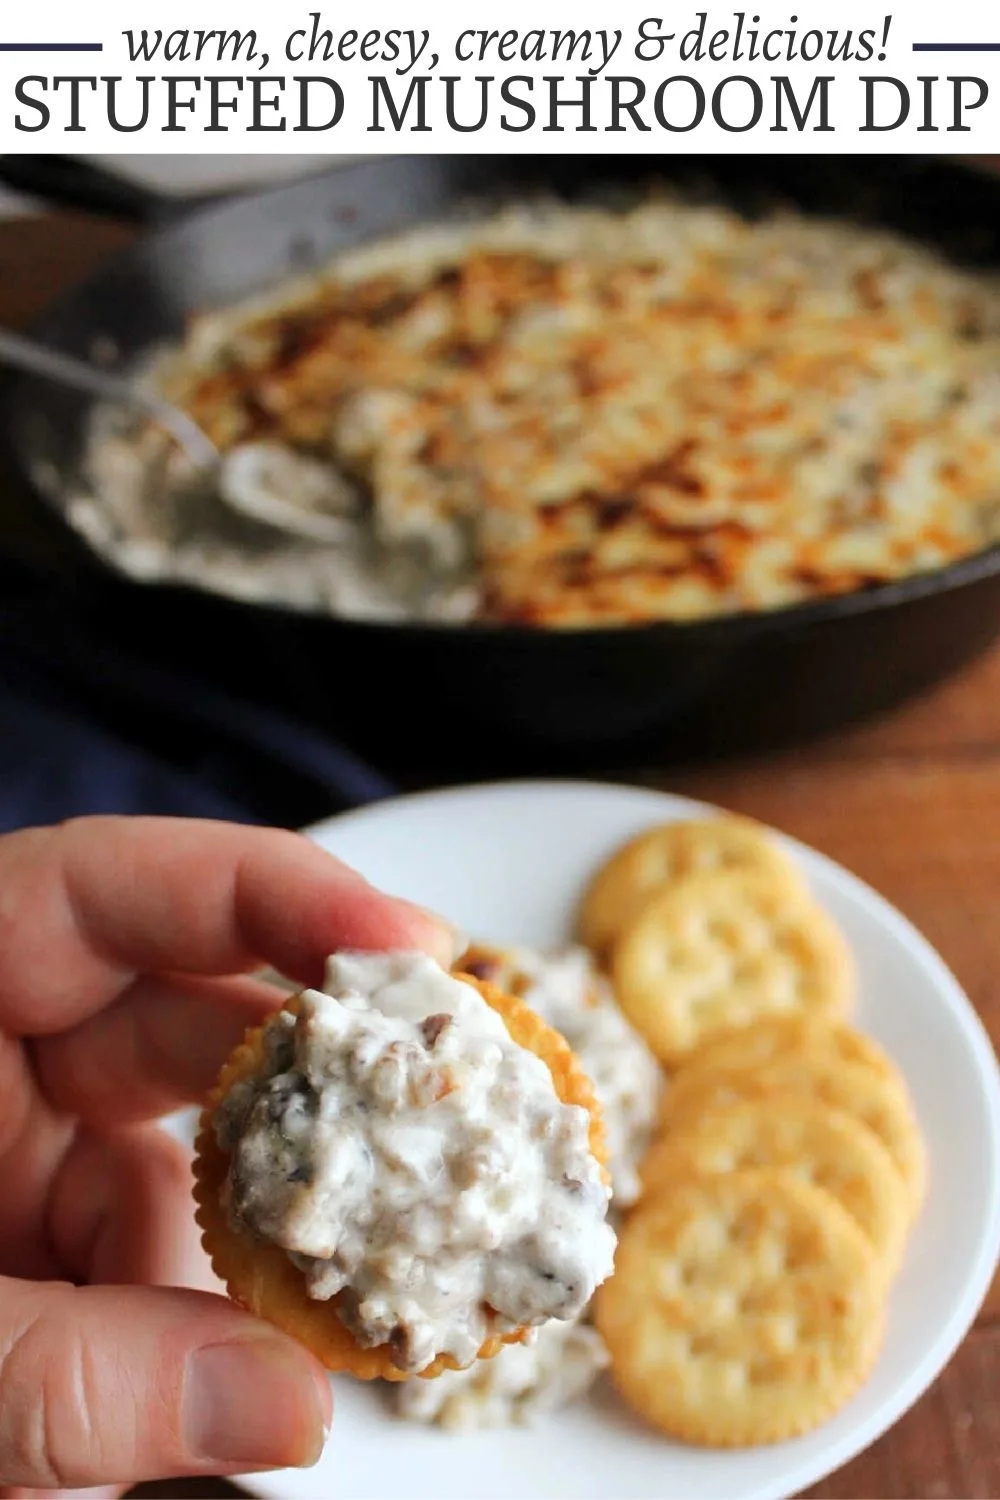 This warm and cheesy stuffed mushroom dip is loaded with sausage, mushrooms, and creamy goodness. It is perfect for people who love stuffed mushrooms, but don't want to go through the effort of making them. Serve the dip with crackers or sliced baguettes for a perfect appetizer.